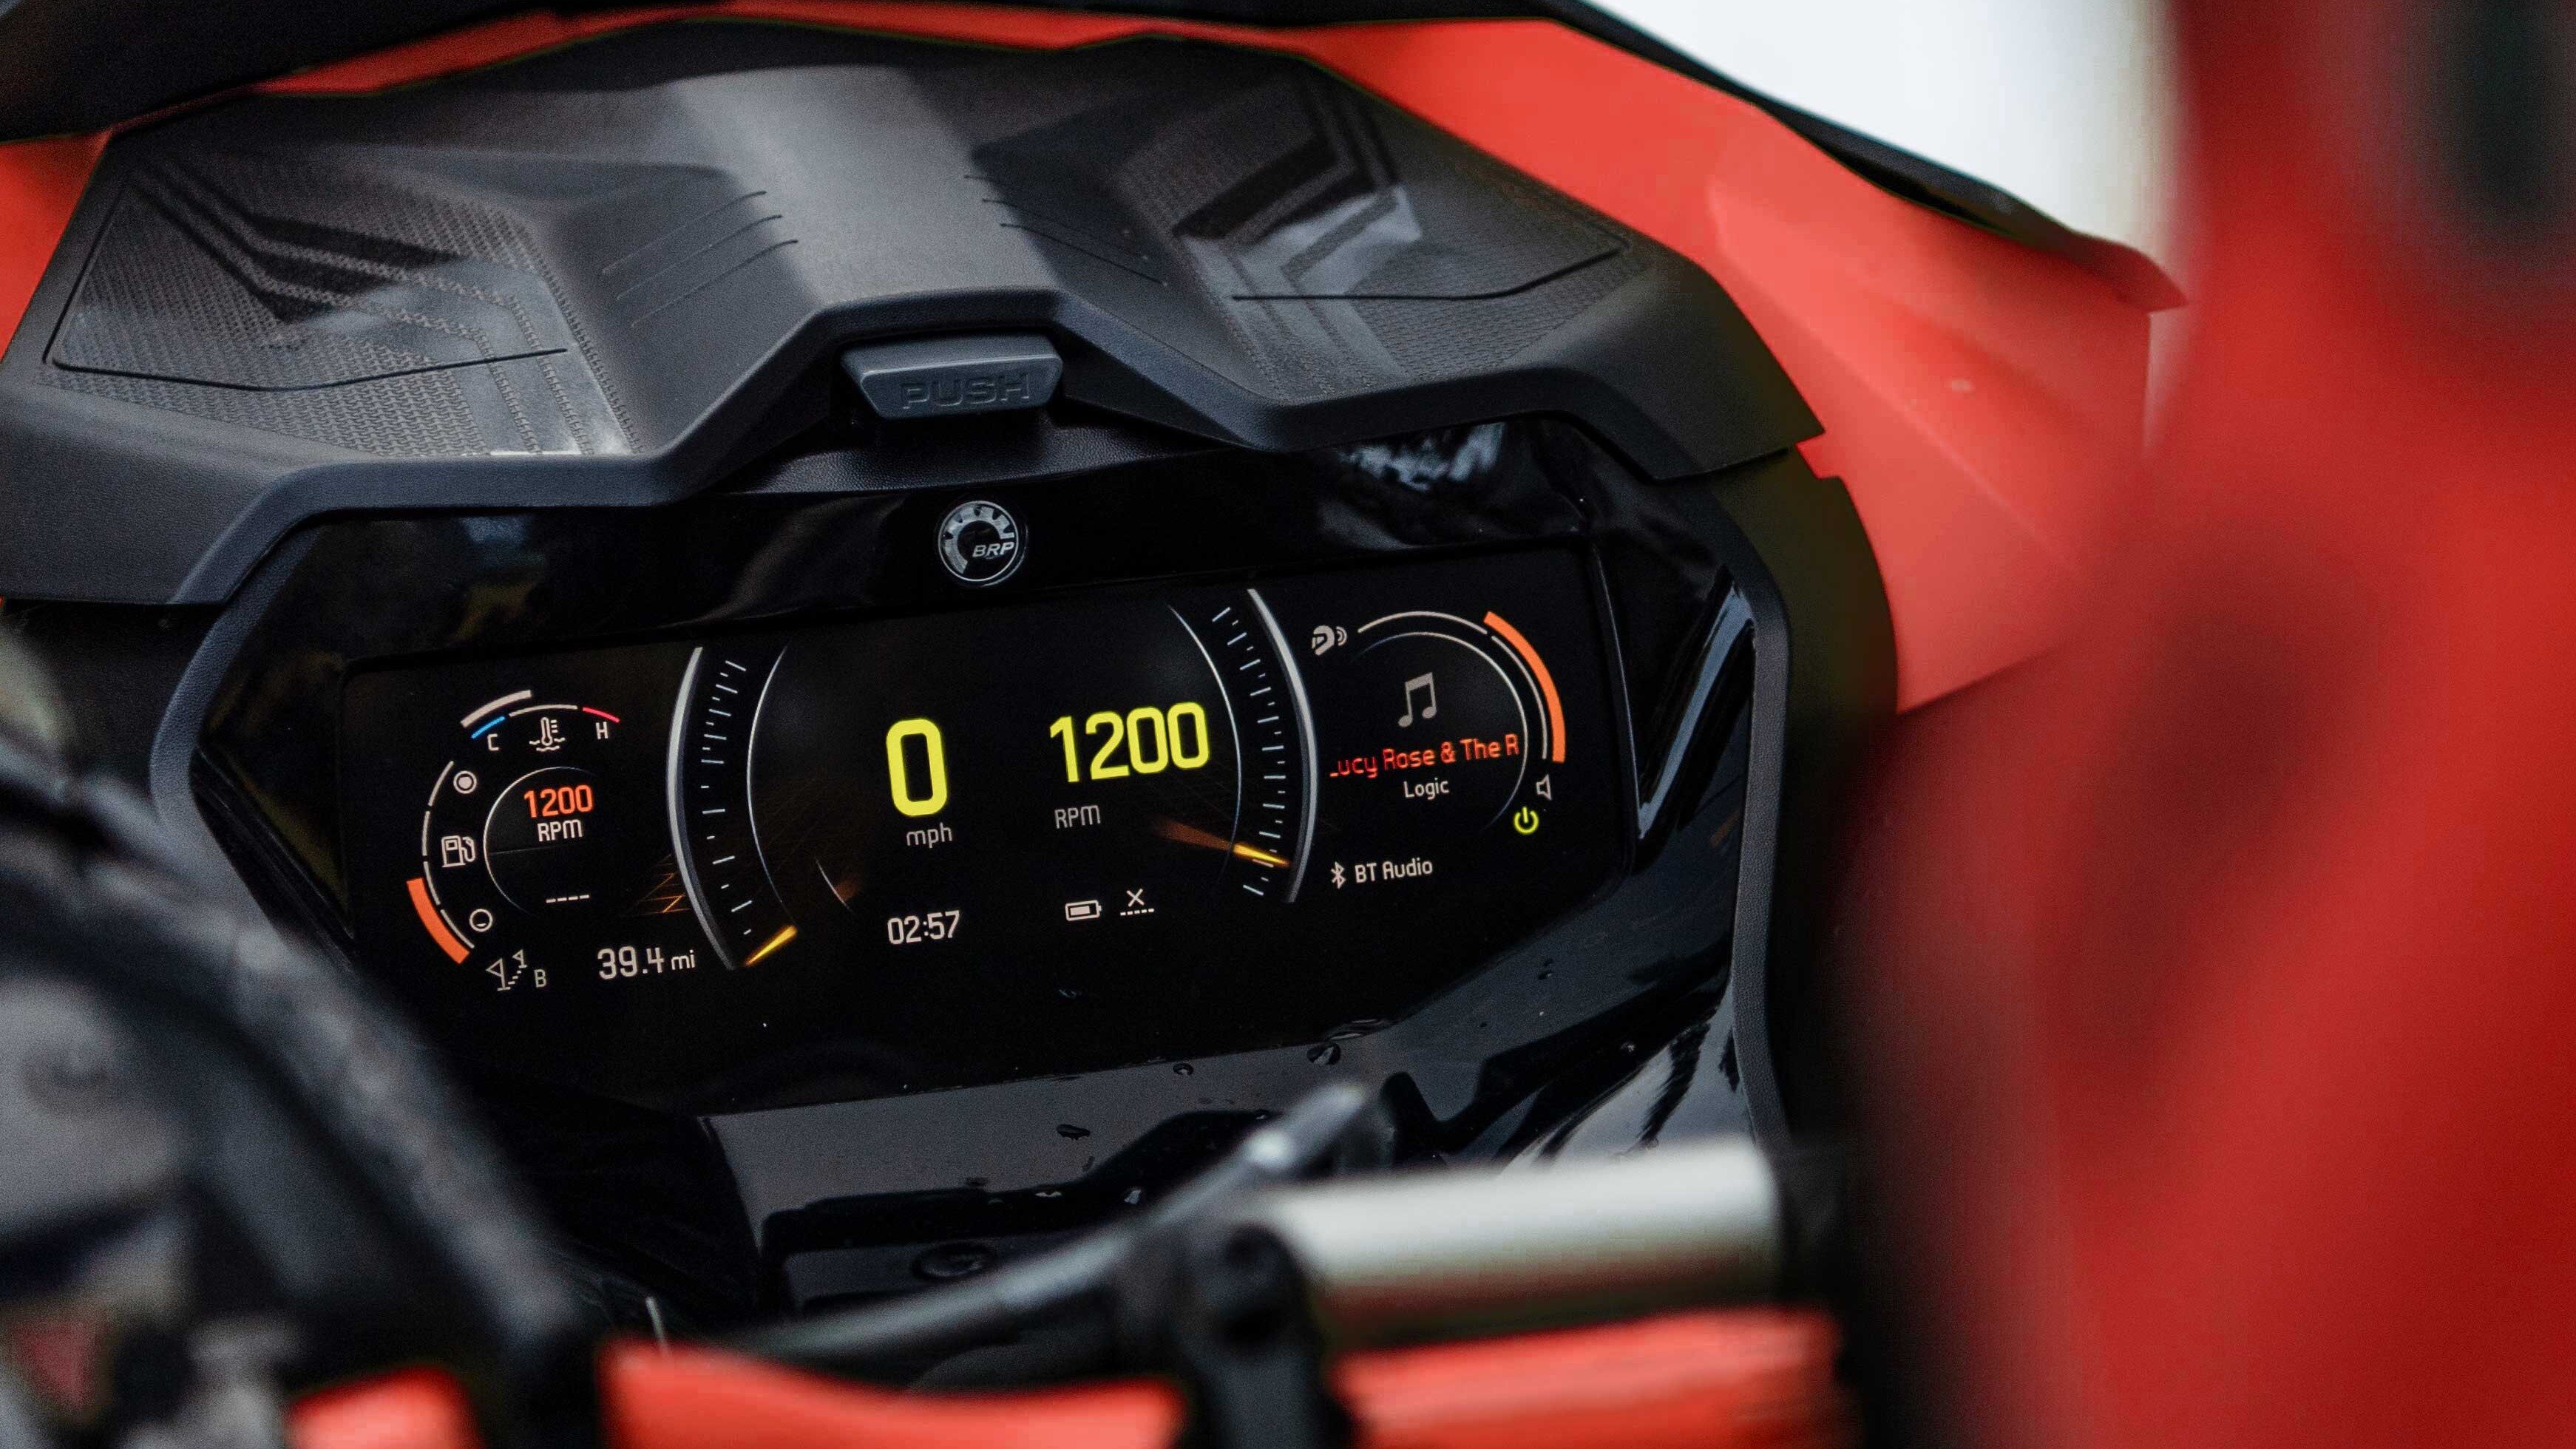 The 7.8" LCD color display with BRP Connect on a Lynx snowmobile